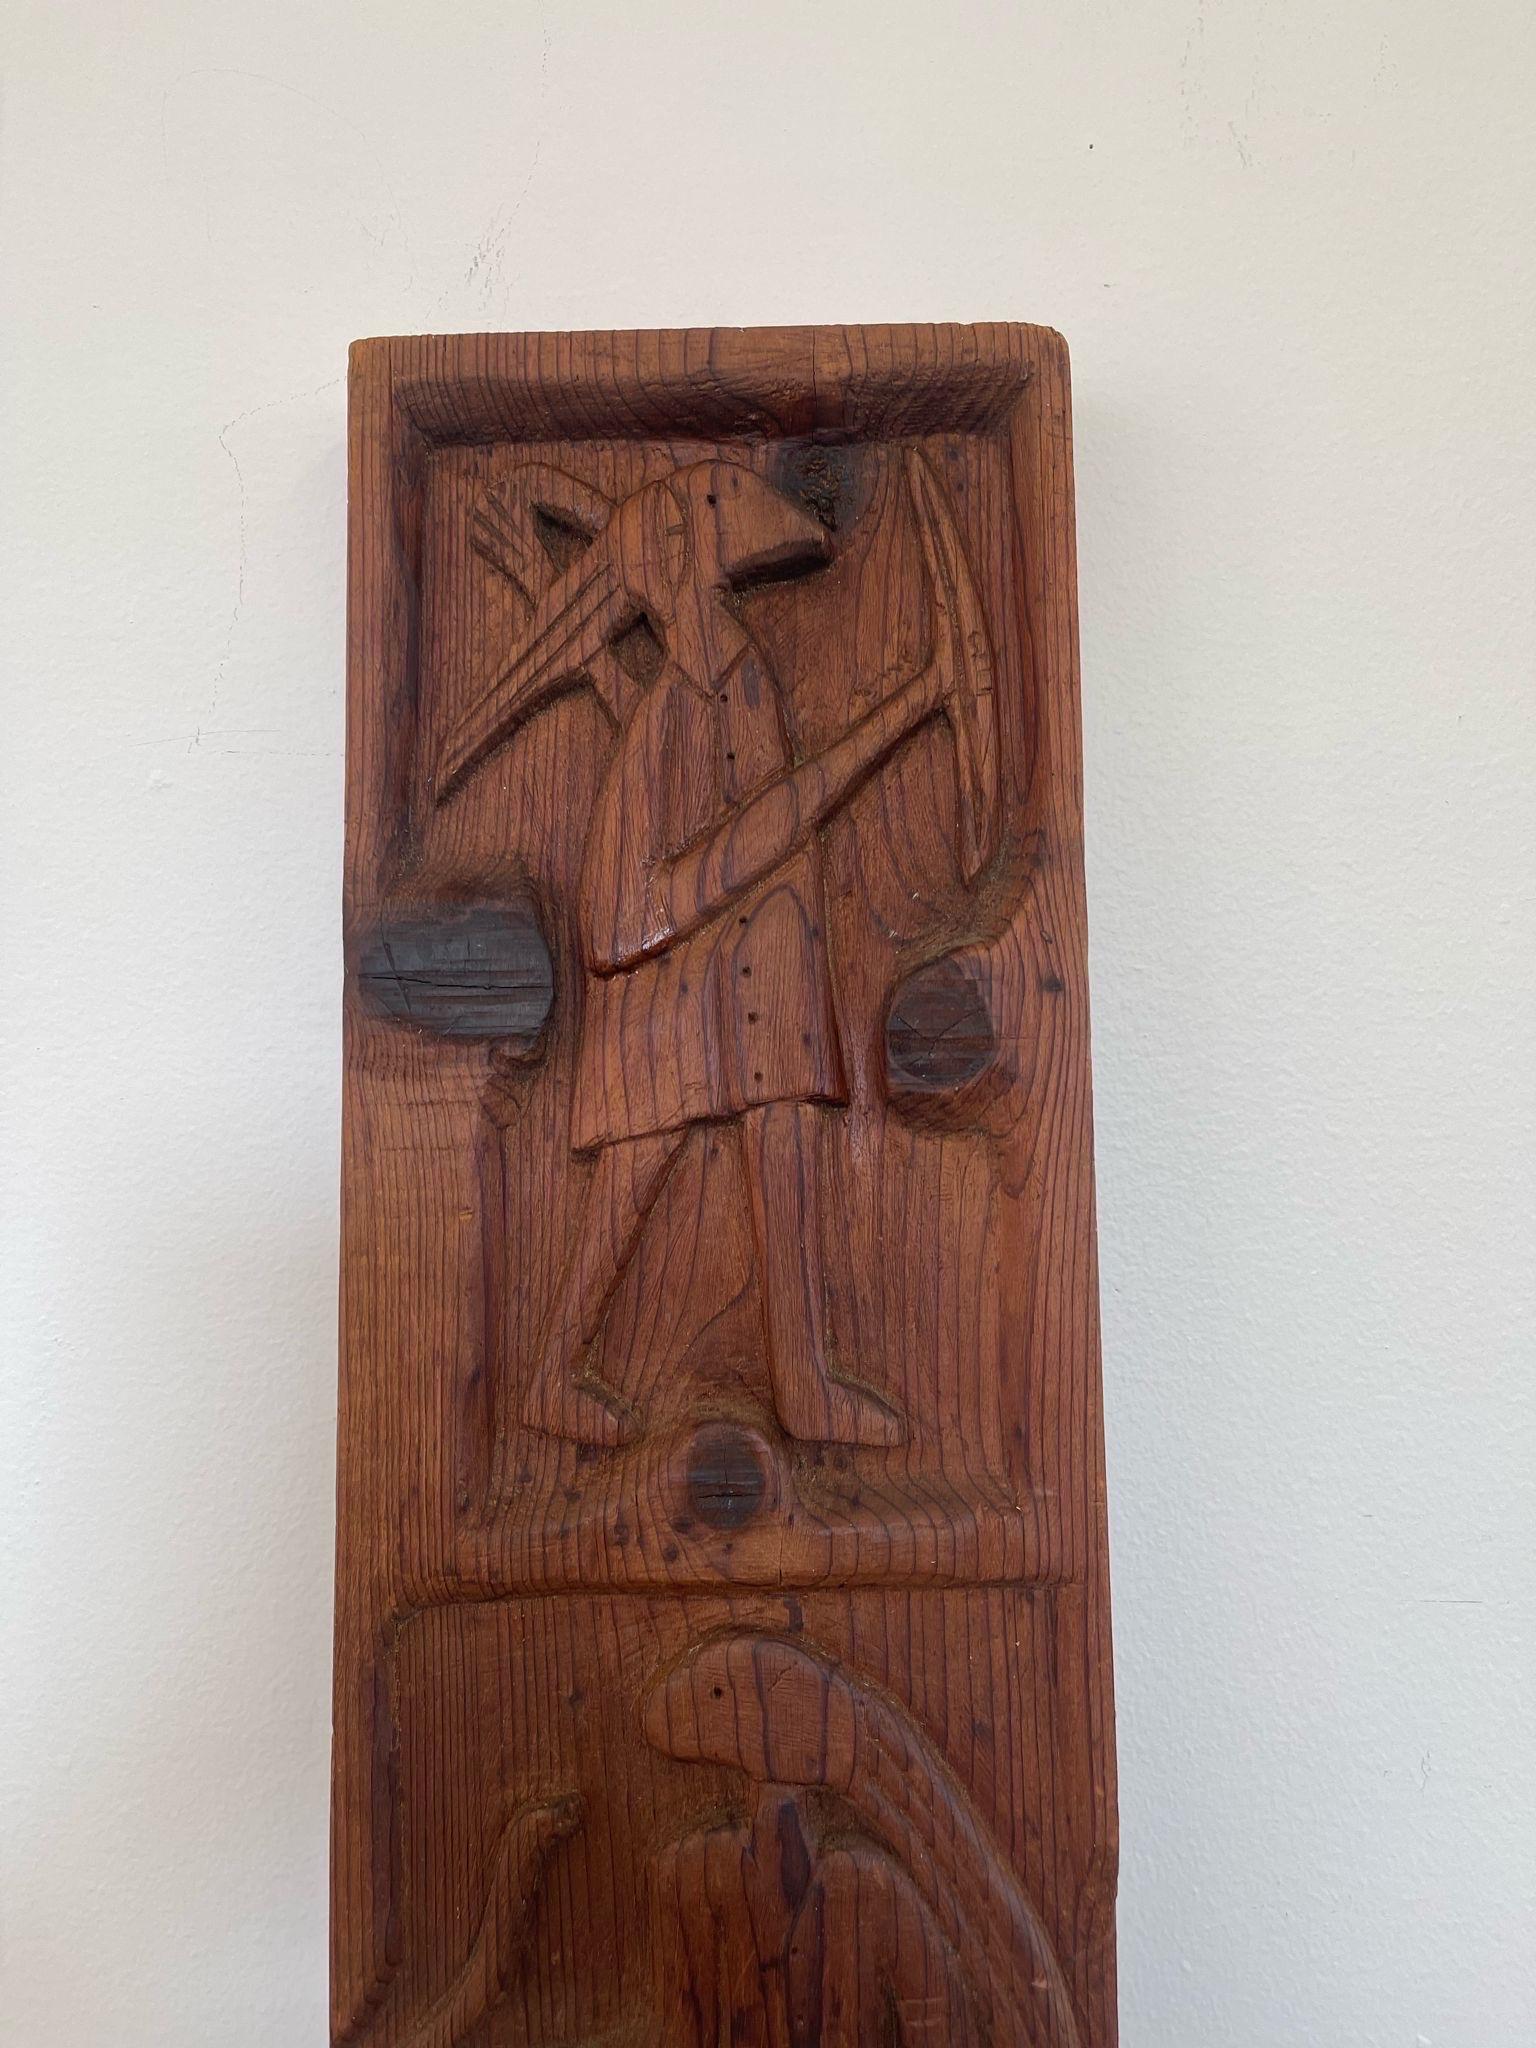 Late 20th Century Vintage Carved Wood Panel Figurative Artwork Wall Decor. For Sale